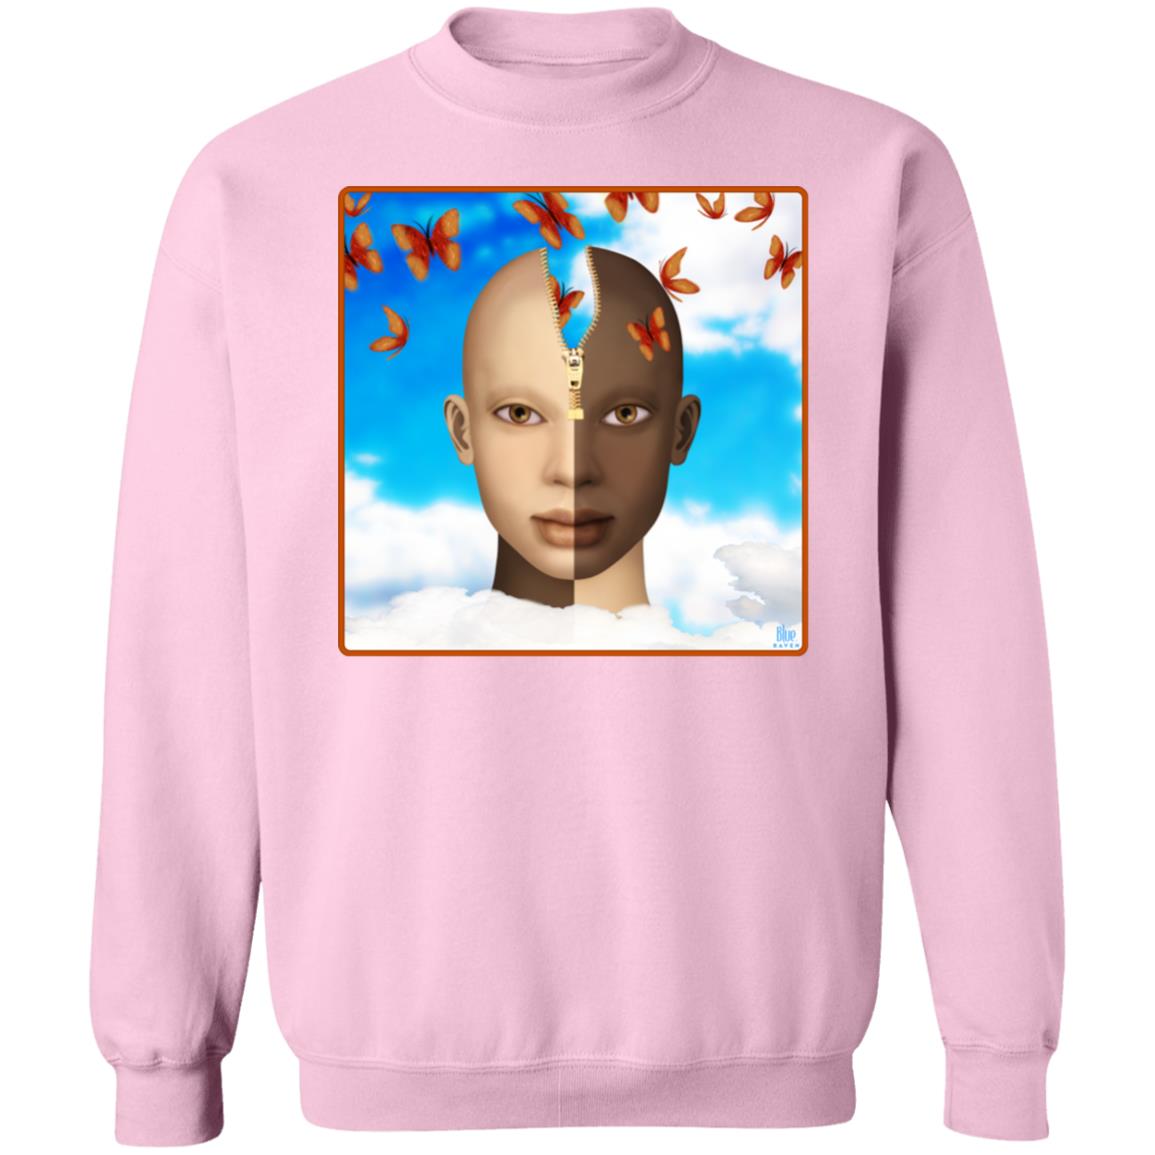 Color Of Our Thoughts - Unisex Crew Neck Sweatshirt